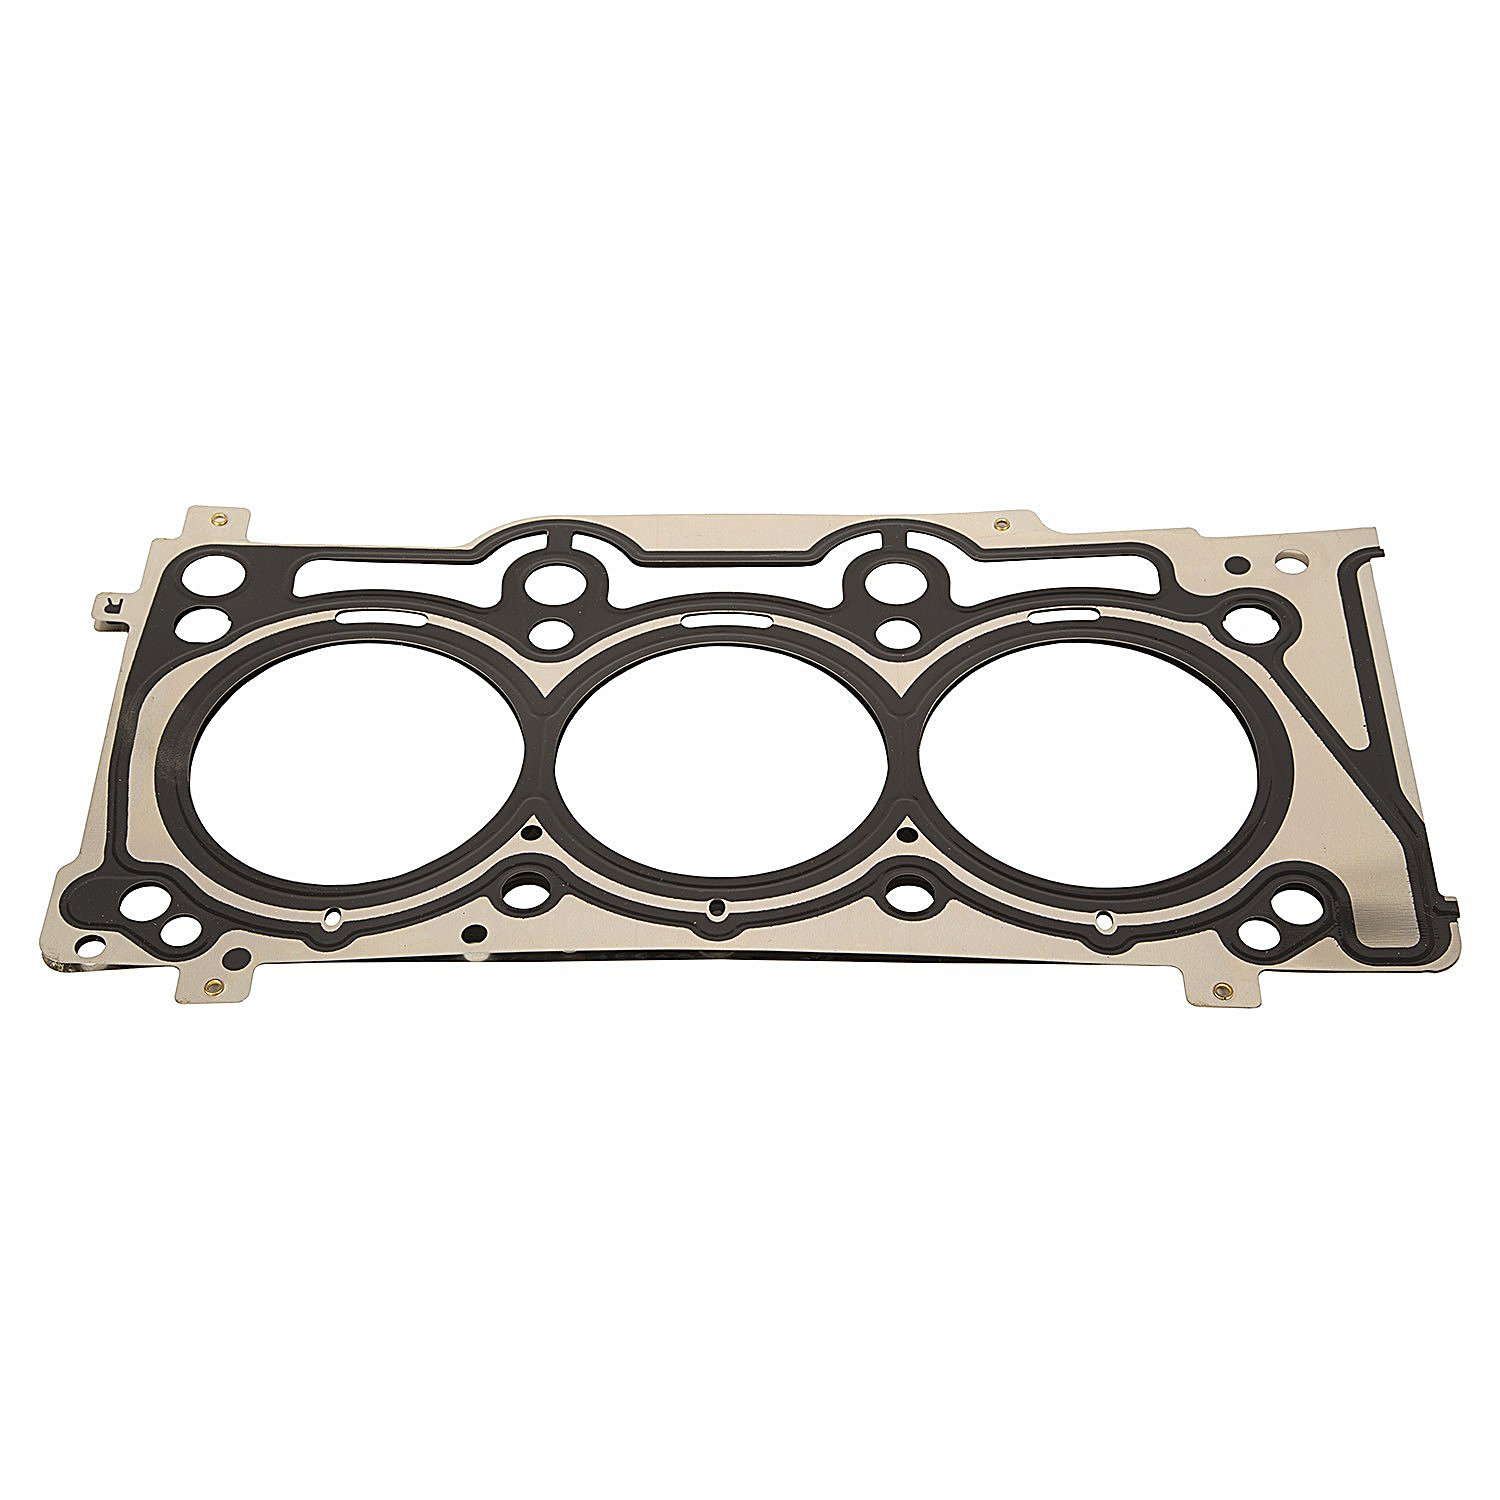 OMIX  Cylinder Head Gasket for 12-18 Jeep Wrangler JK and 11-18 Jeep  Grand Cherokee WK | Quadratec